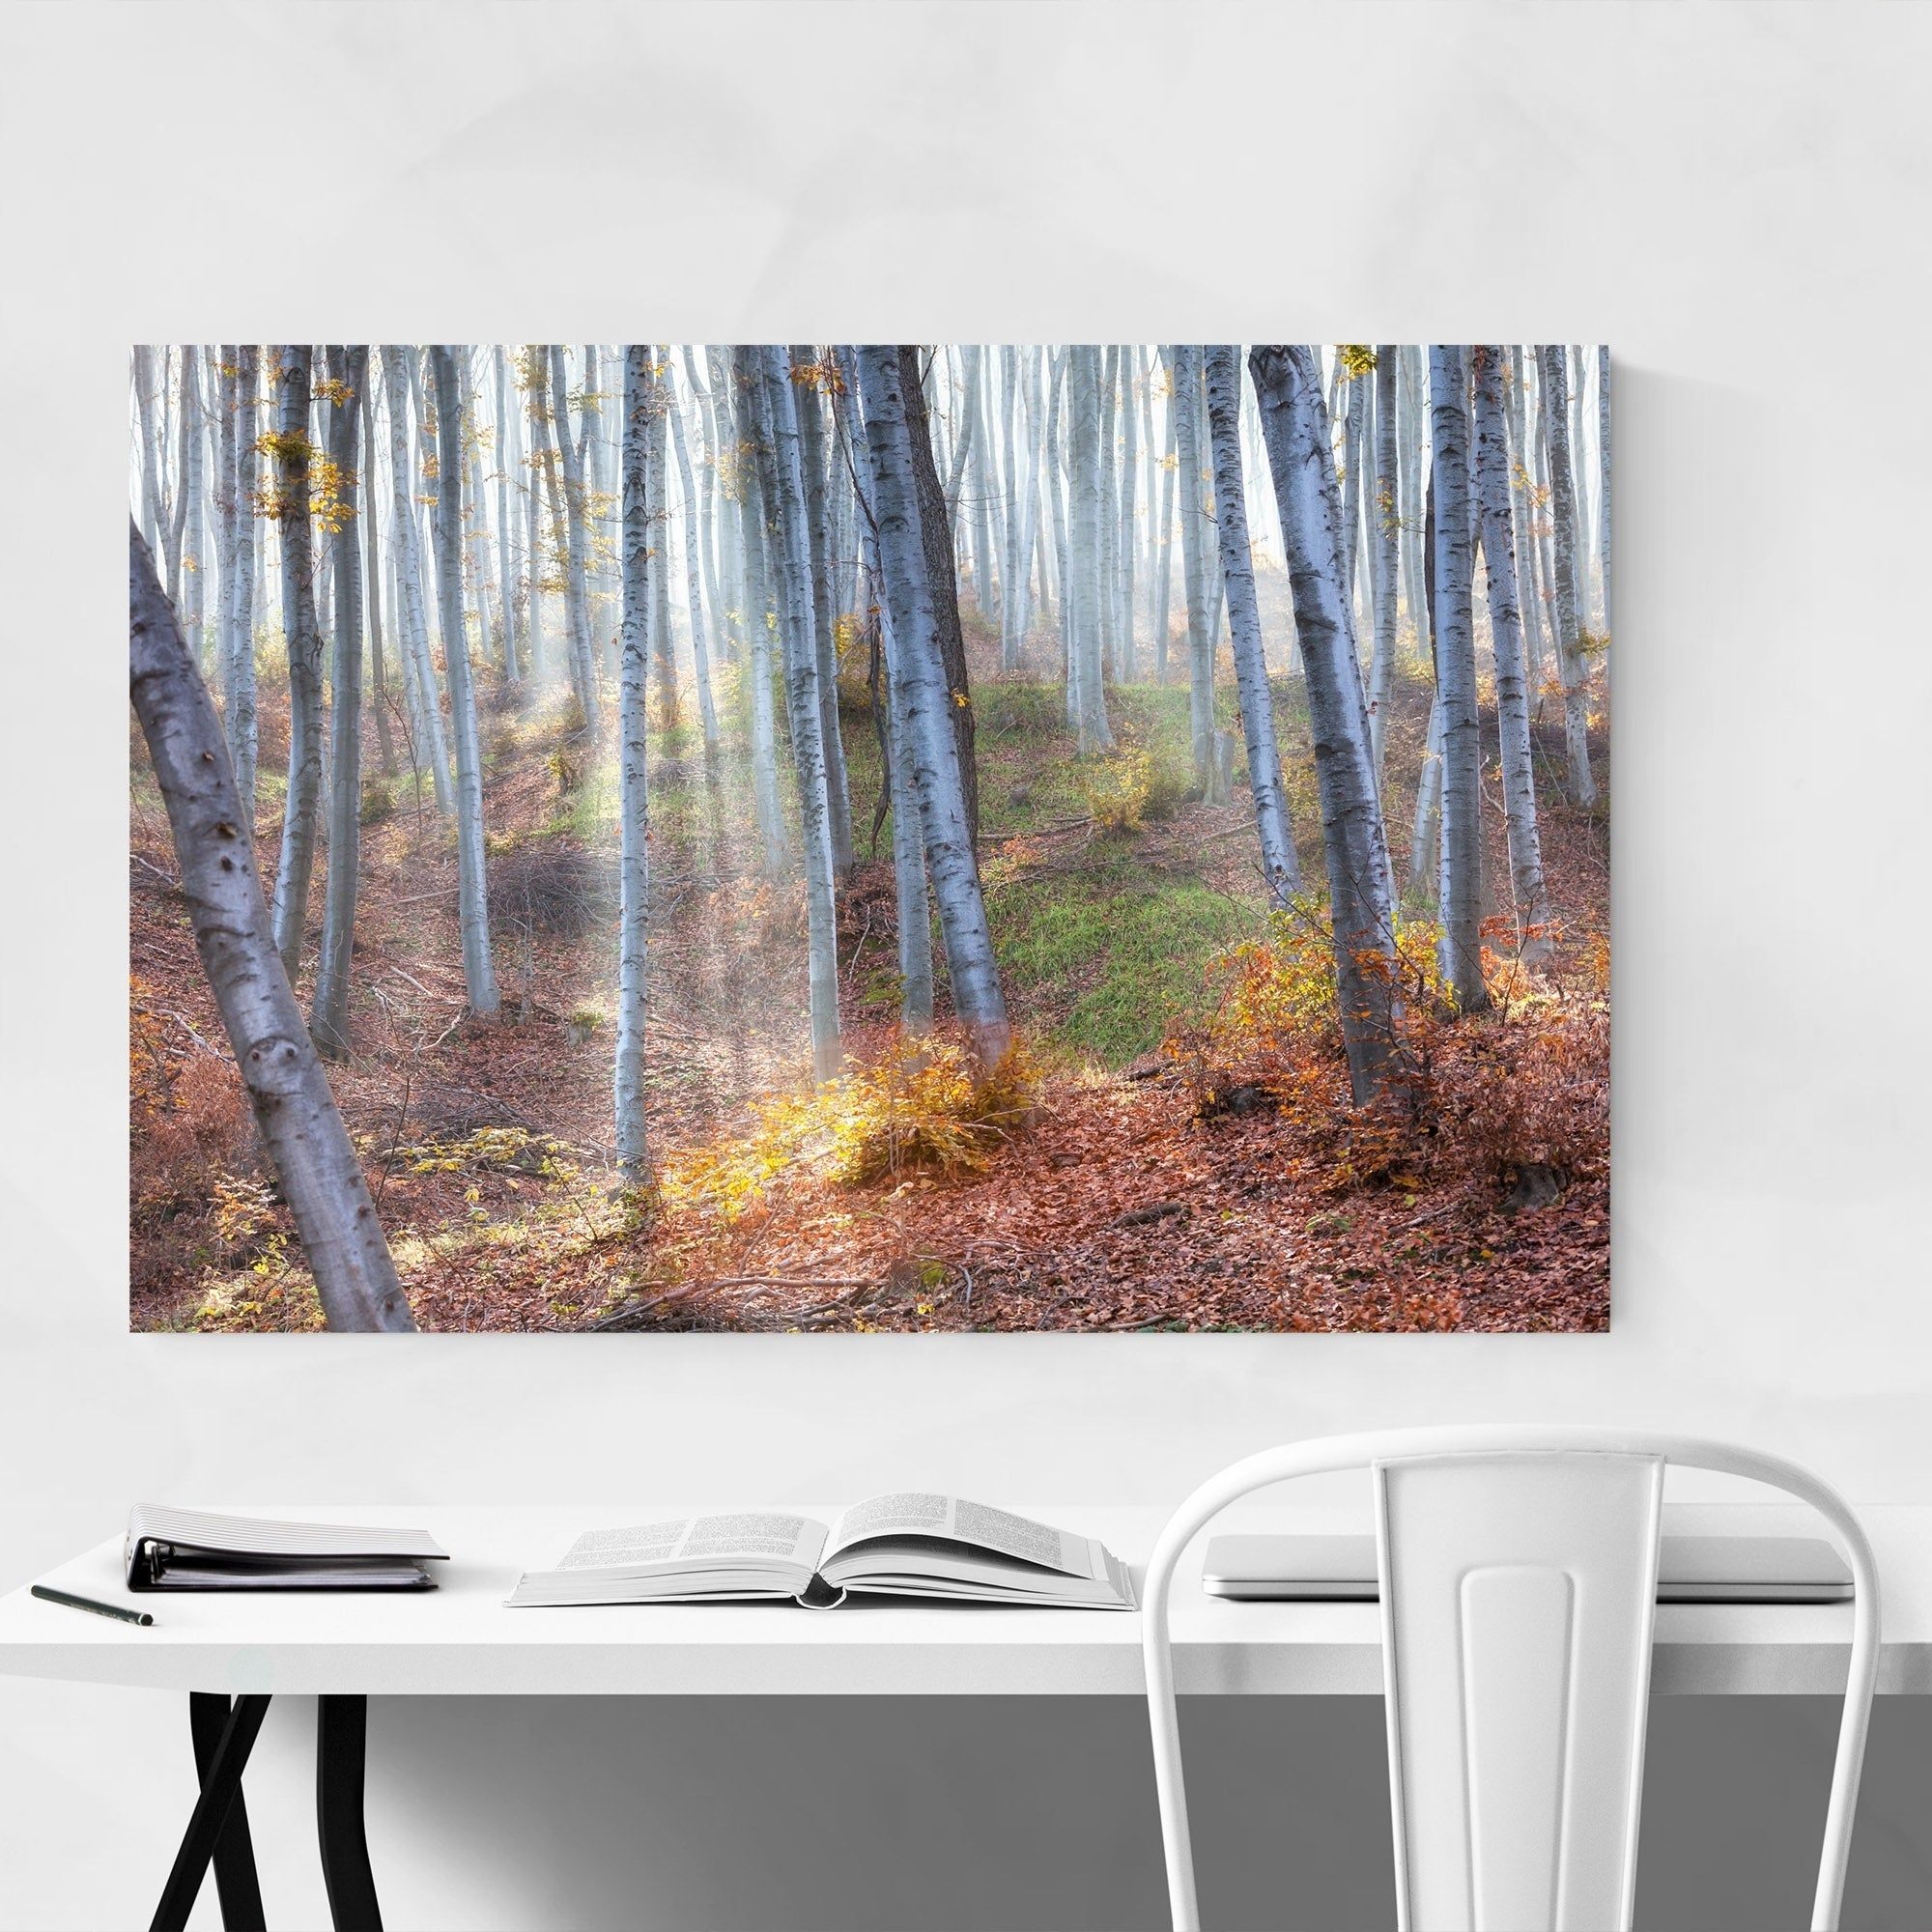 Noir Gallery 'between Fog And Sun'evgini Dinev Bulgaria Forest  Landscape Nature Metal Wall Art Print With Regard To Nature Metal Sun Wall Decor (View 13 of 30)